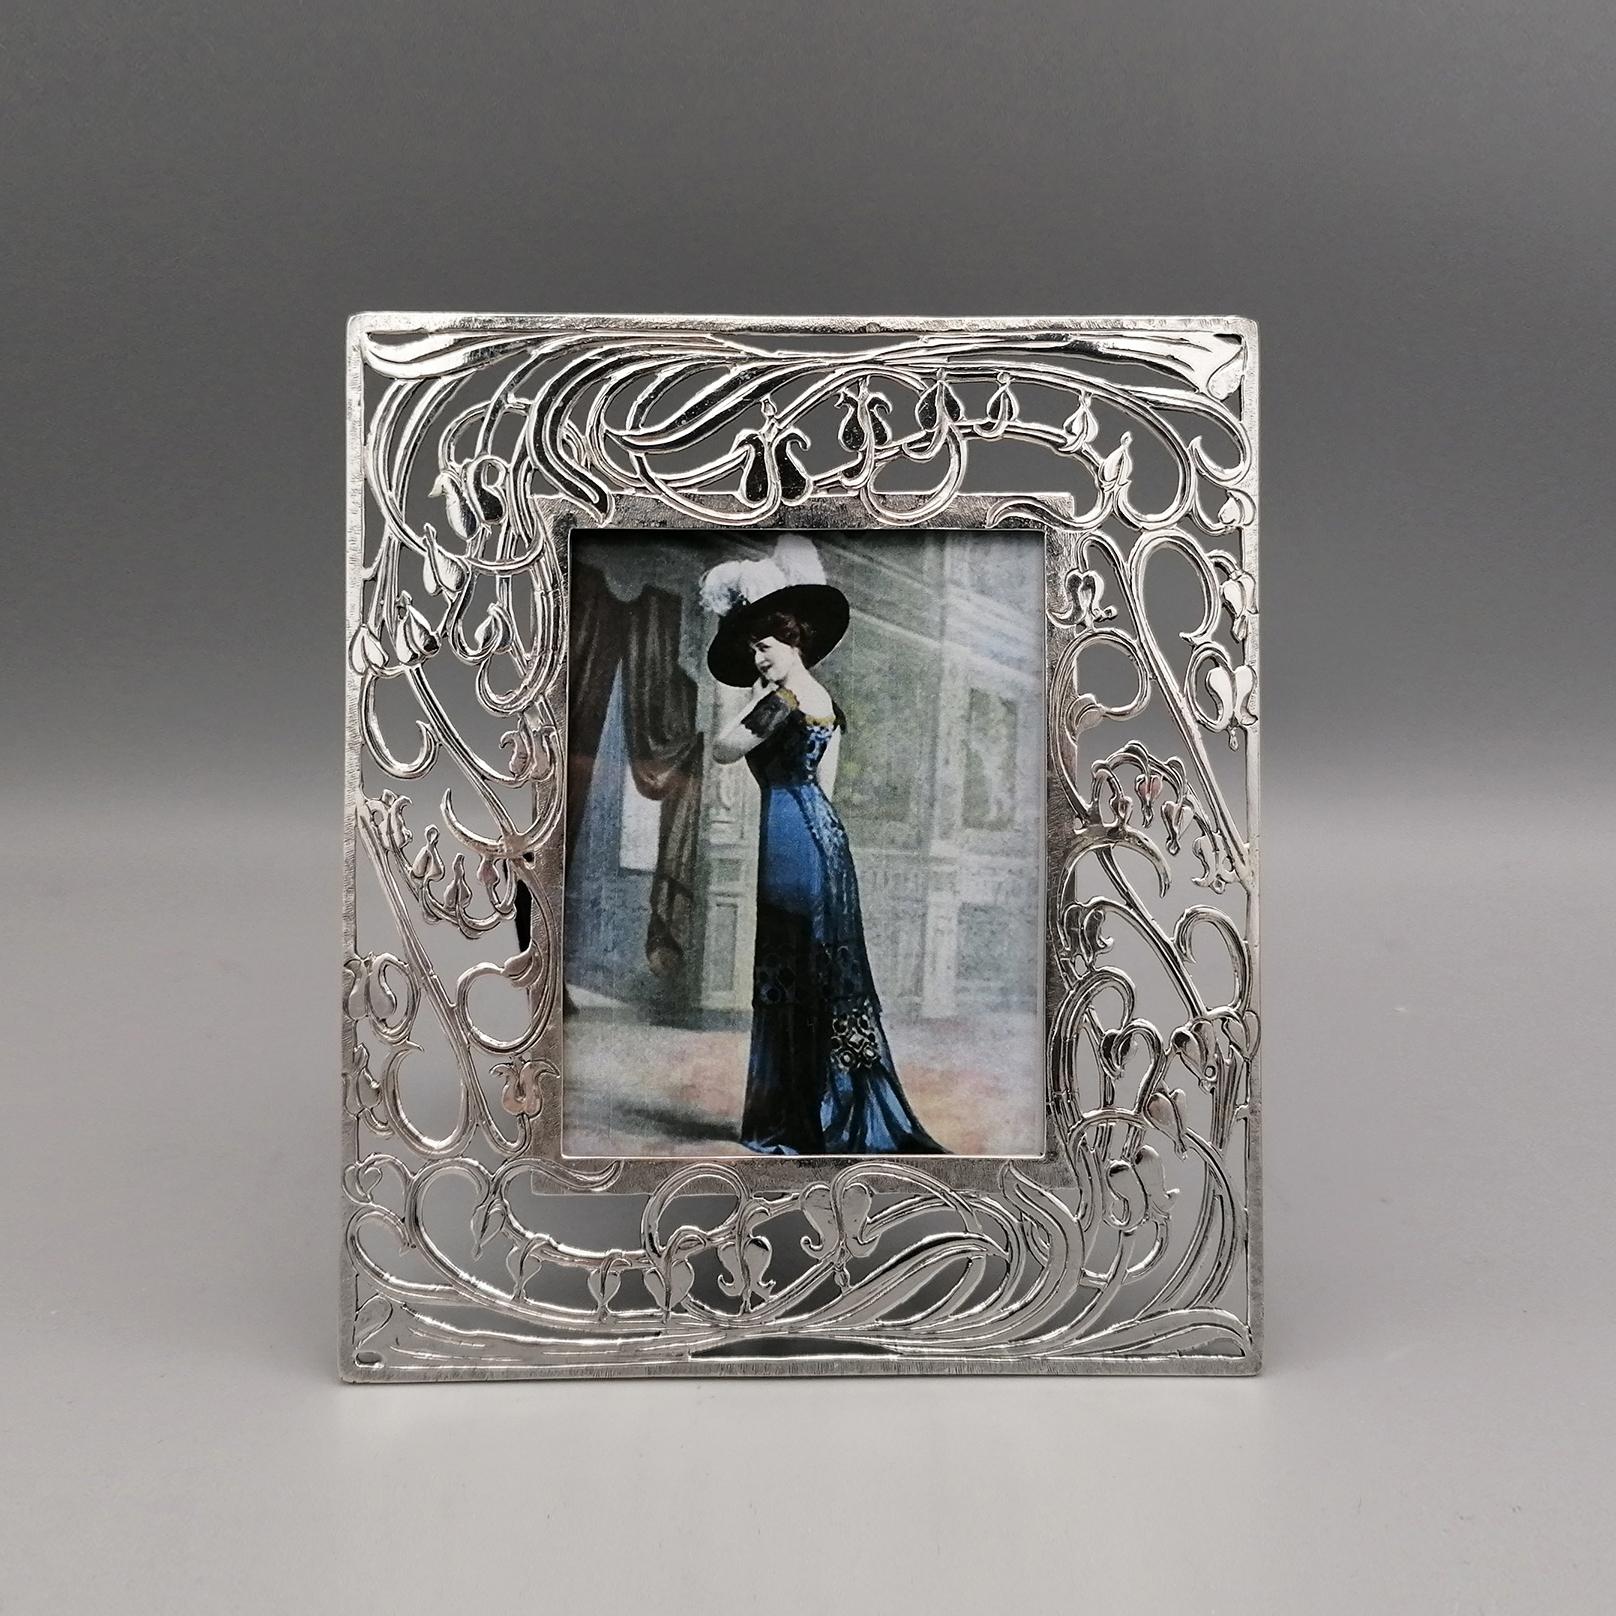 This frame was made in sterling silver with the method of fusion and subsequently finished with a chisel.
Decorated with flowers and leaves typical of the Liberty or Art Nouveau style, following the fashion of the frames that were made between the